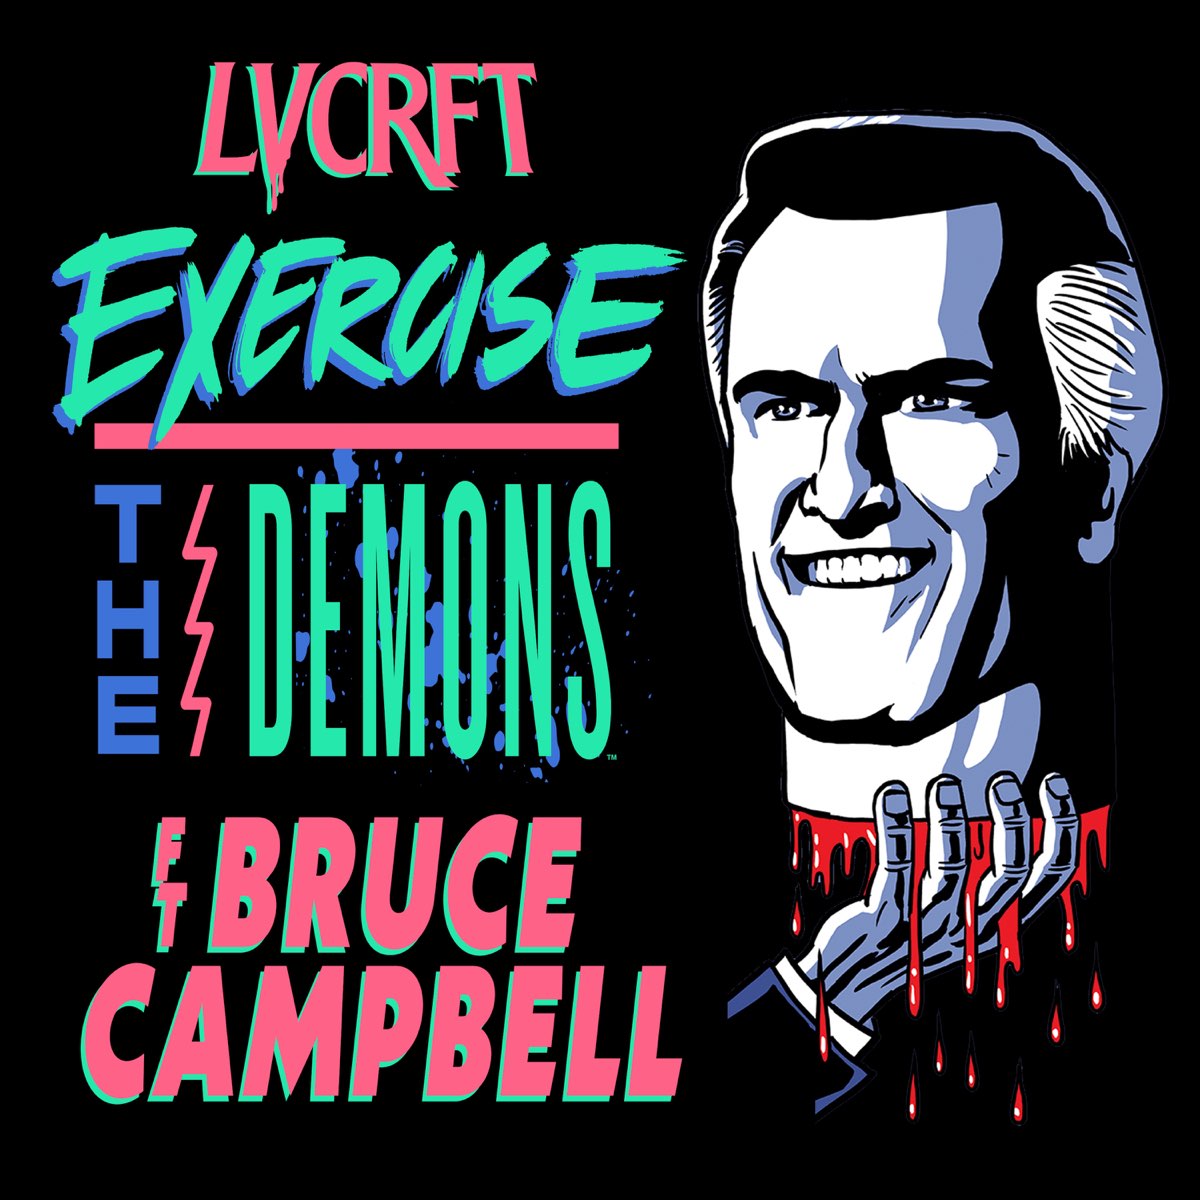 LVCRFT feat. Bruce Campbell - 'Exercise The Demons' [Official Ringtone for Android]